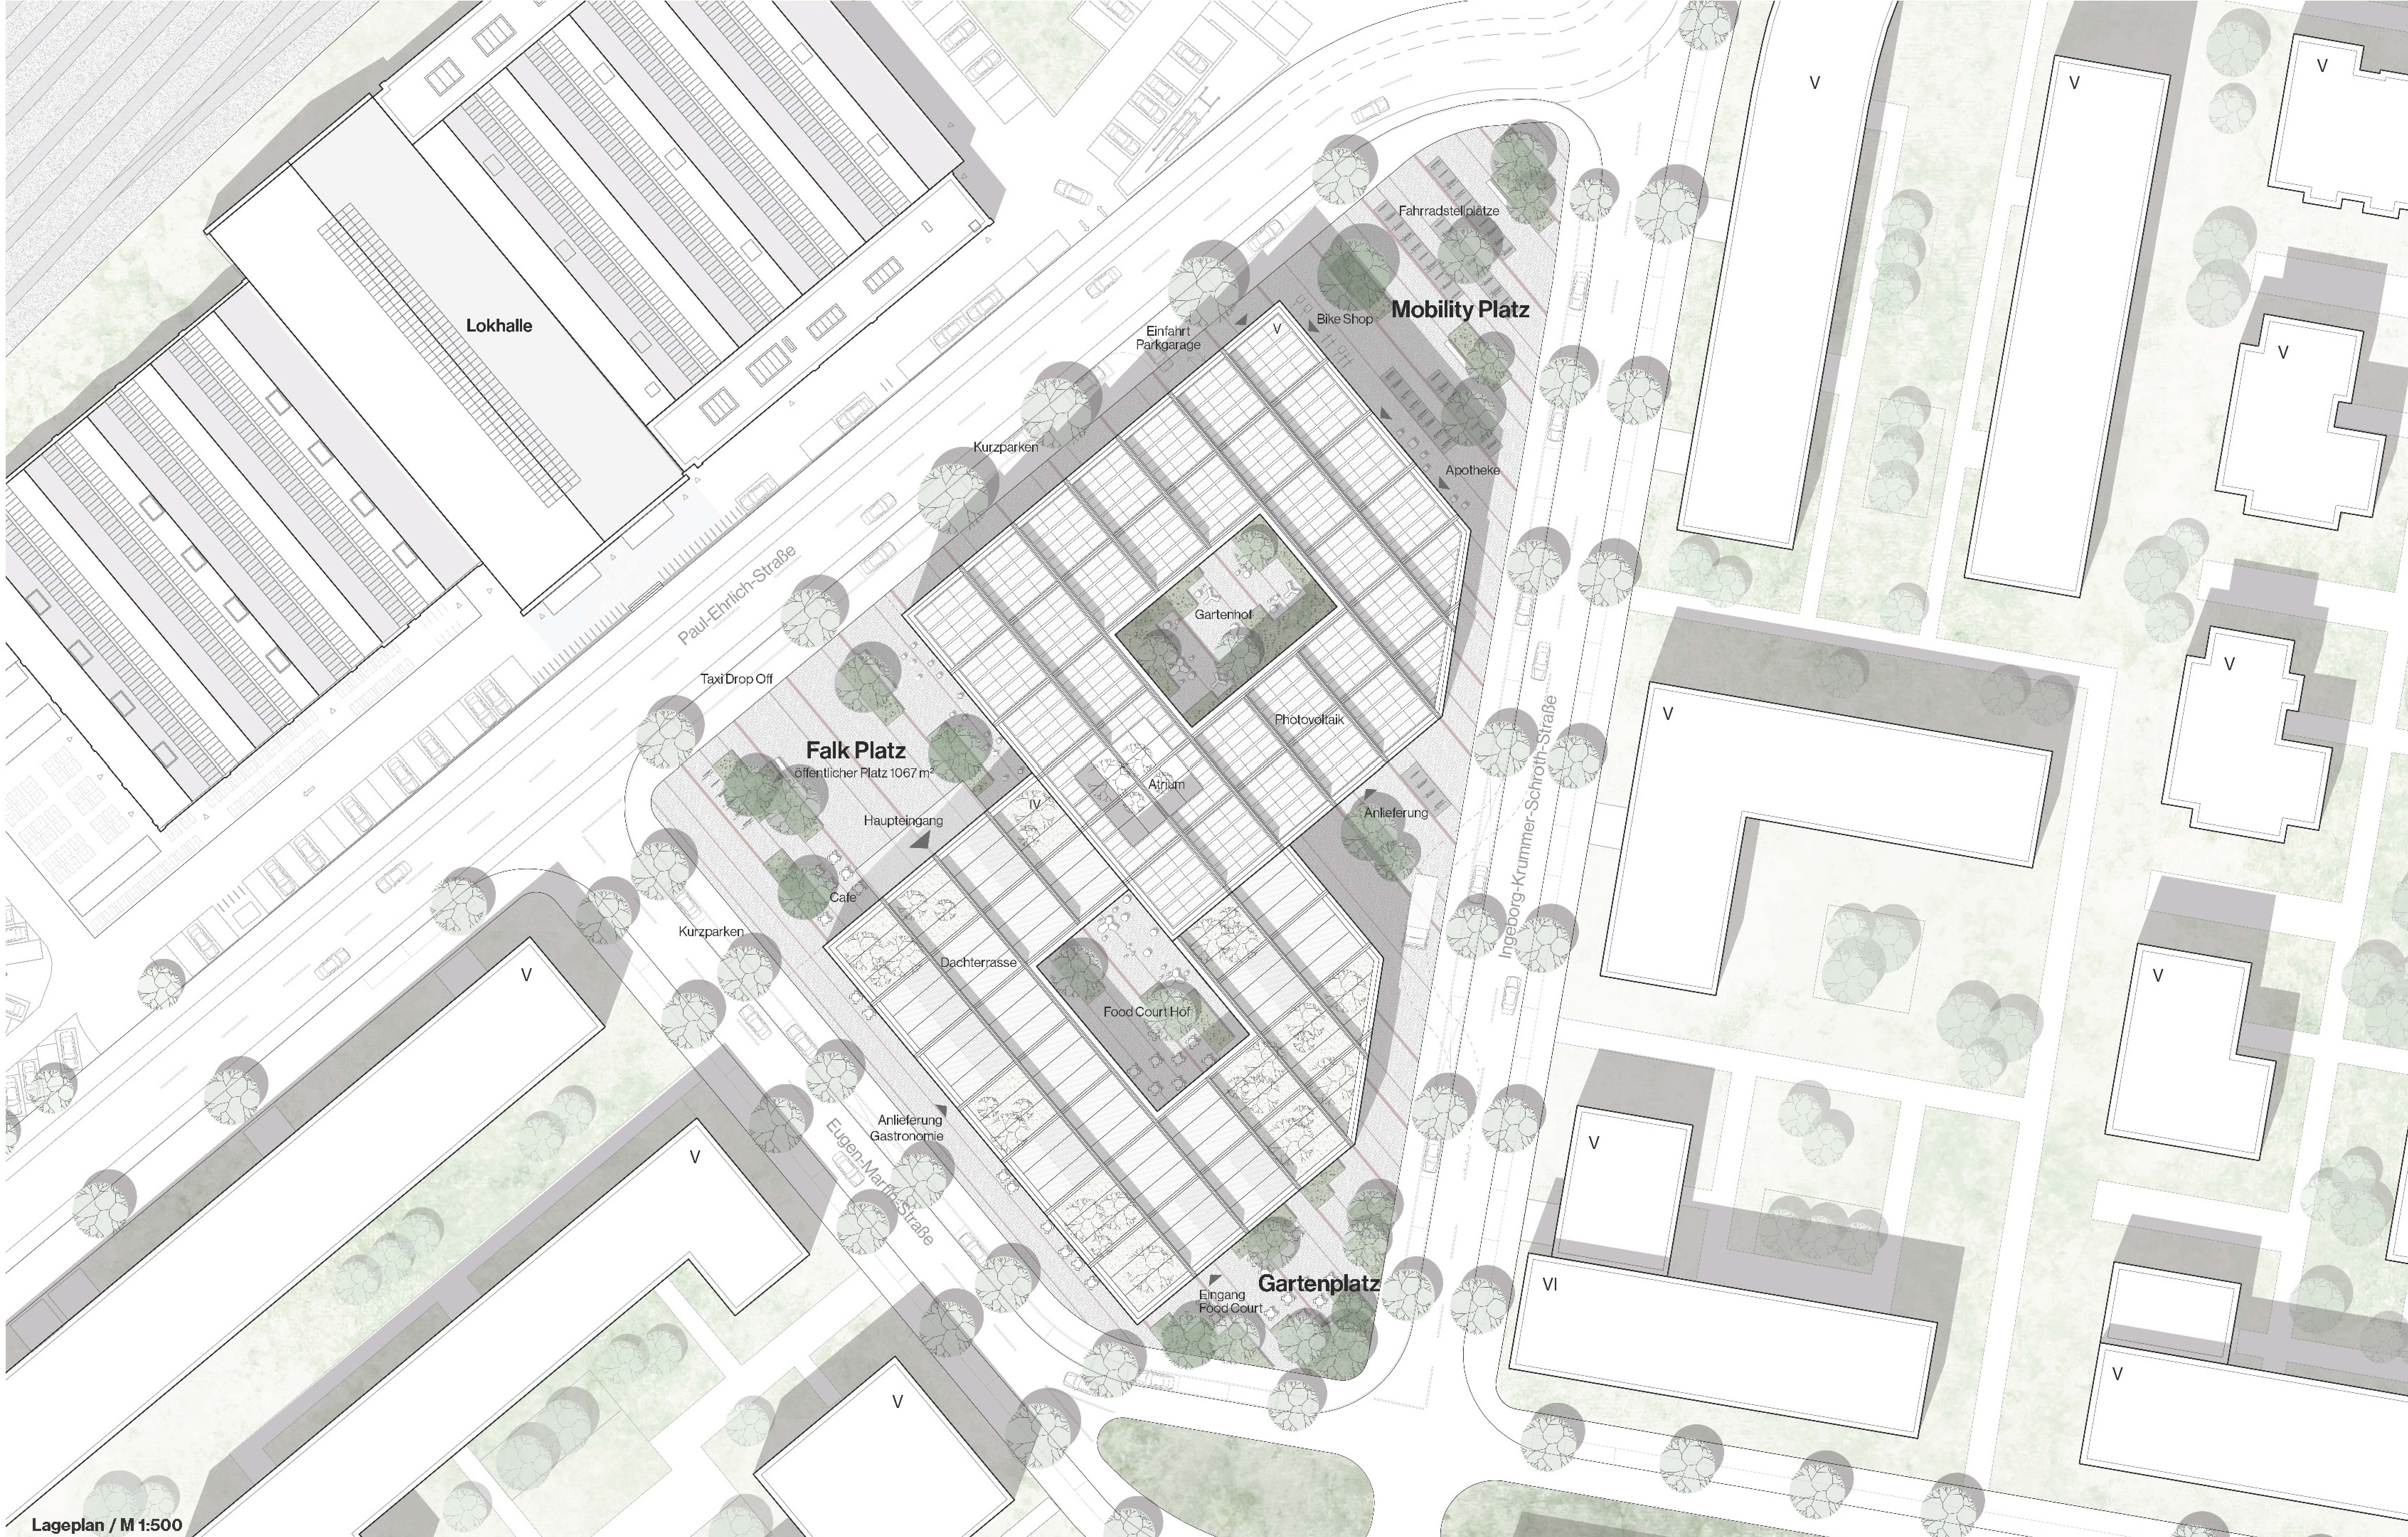 Falk Campus site plan of wo intertwined atrium structures